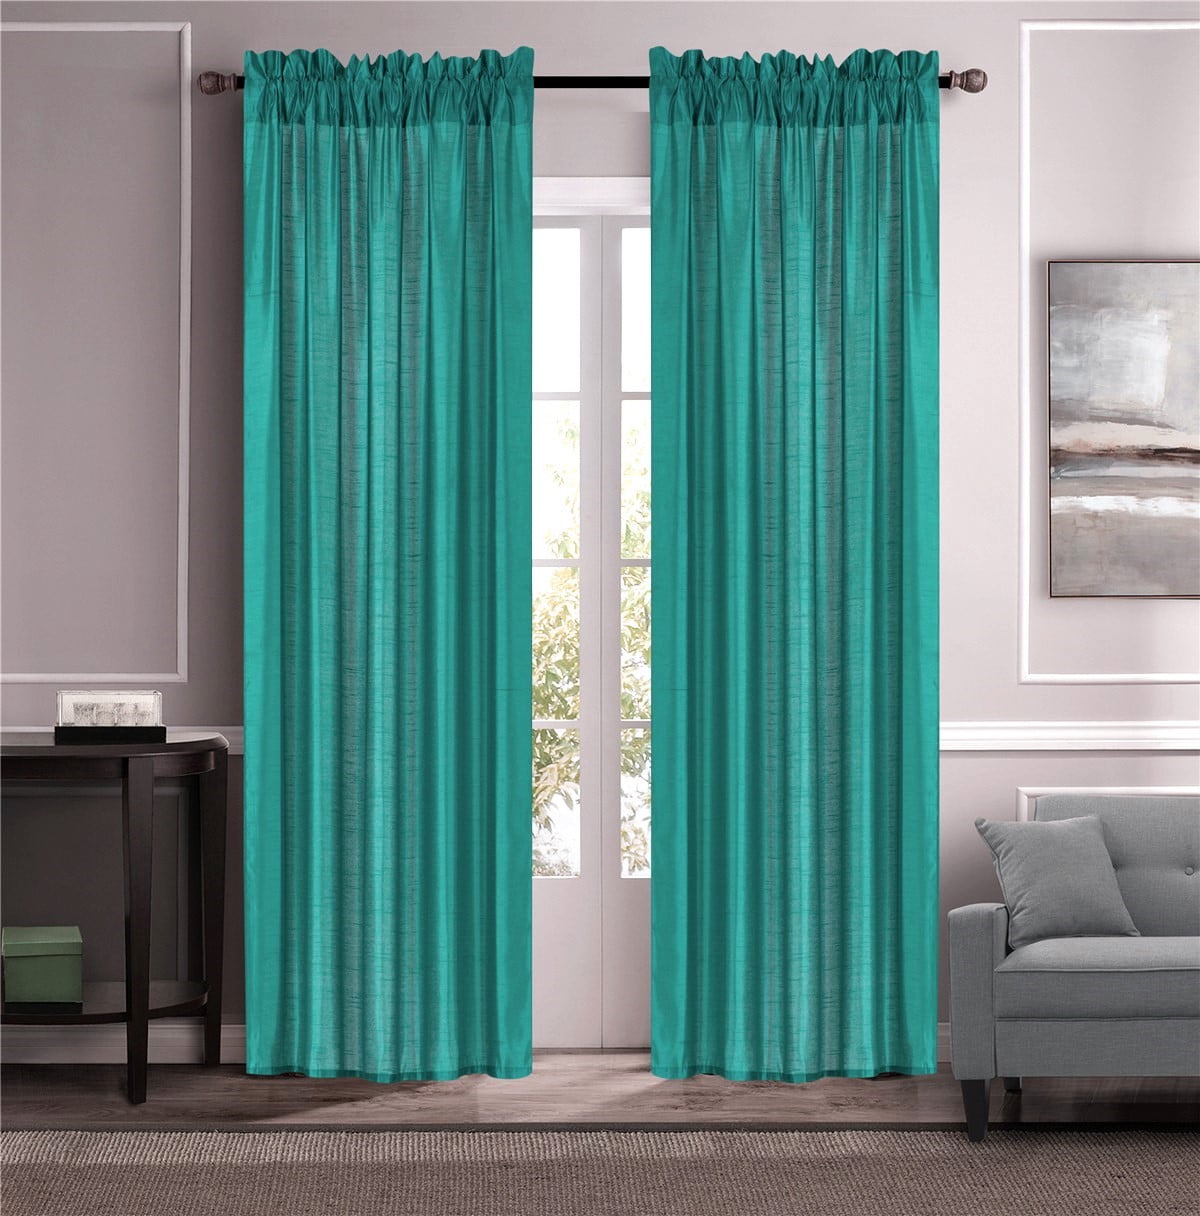 2PC HOME DECOR VOILE SHEER WINDOW ROD POCKET CURTAIN TREATMENT PANEL TEAL 